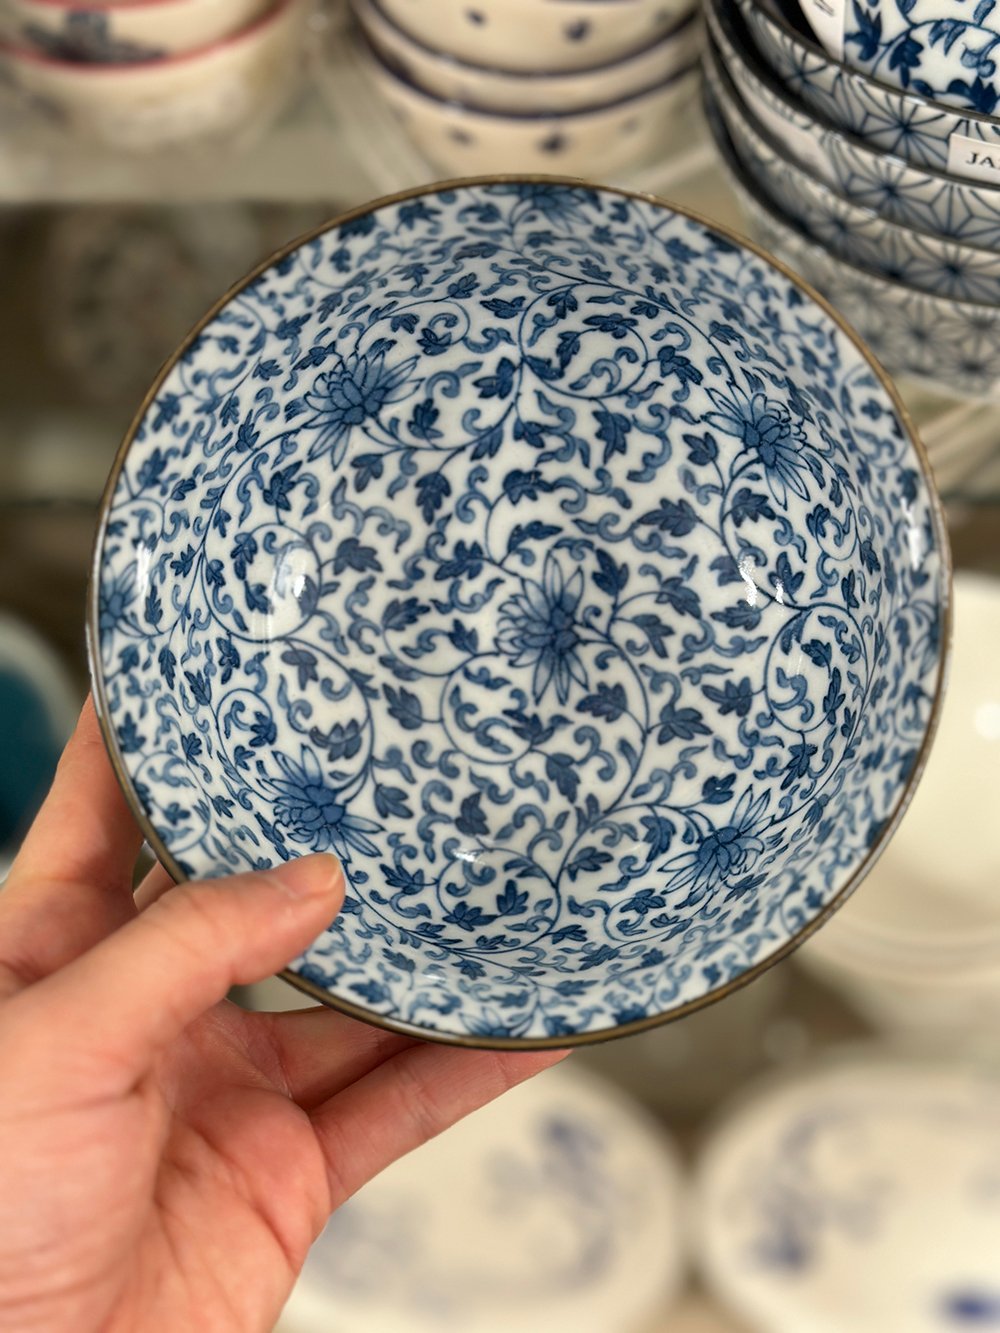 15 Home Decor Finds from TJ Maxx HomeGoods - roomfortuesday.com